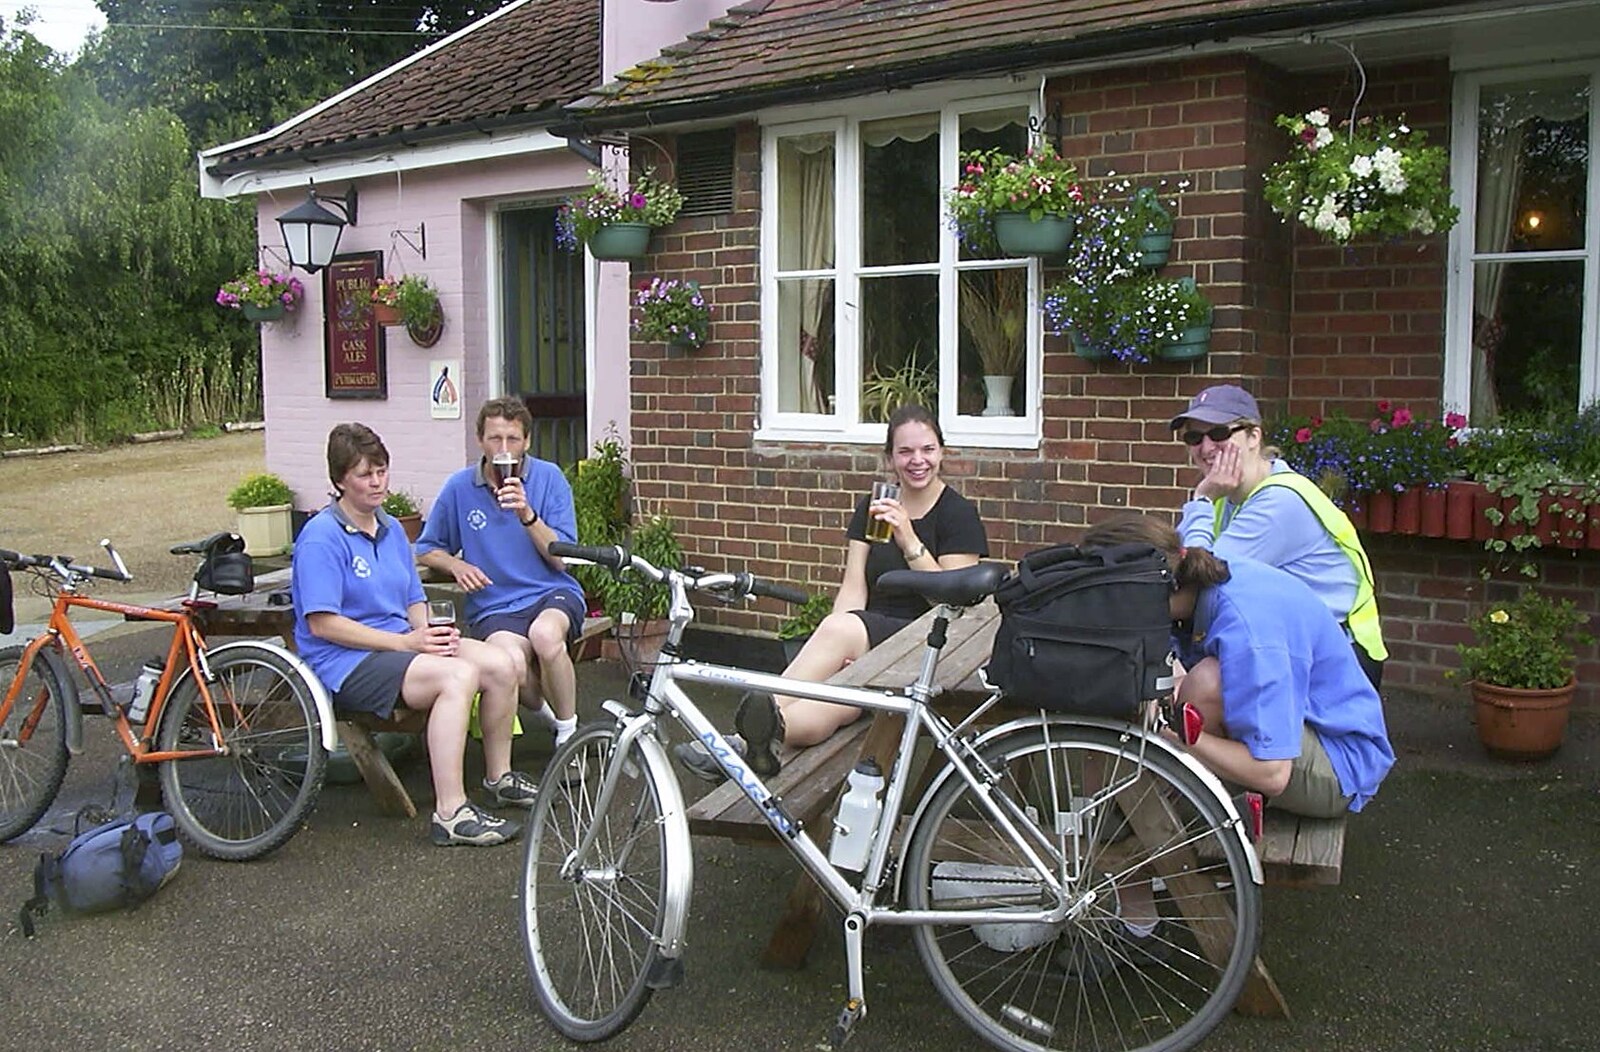 The BSCC Annual Sponsored Bike Ride, The Cottage, Thorpe St. Andrew, Norwich  - 18th July 2004: Pip, Apple, Jen and Sarah